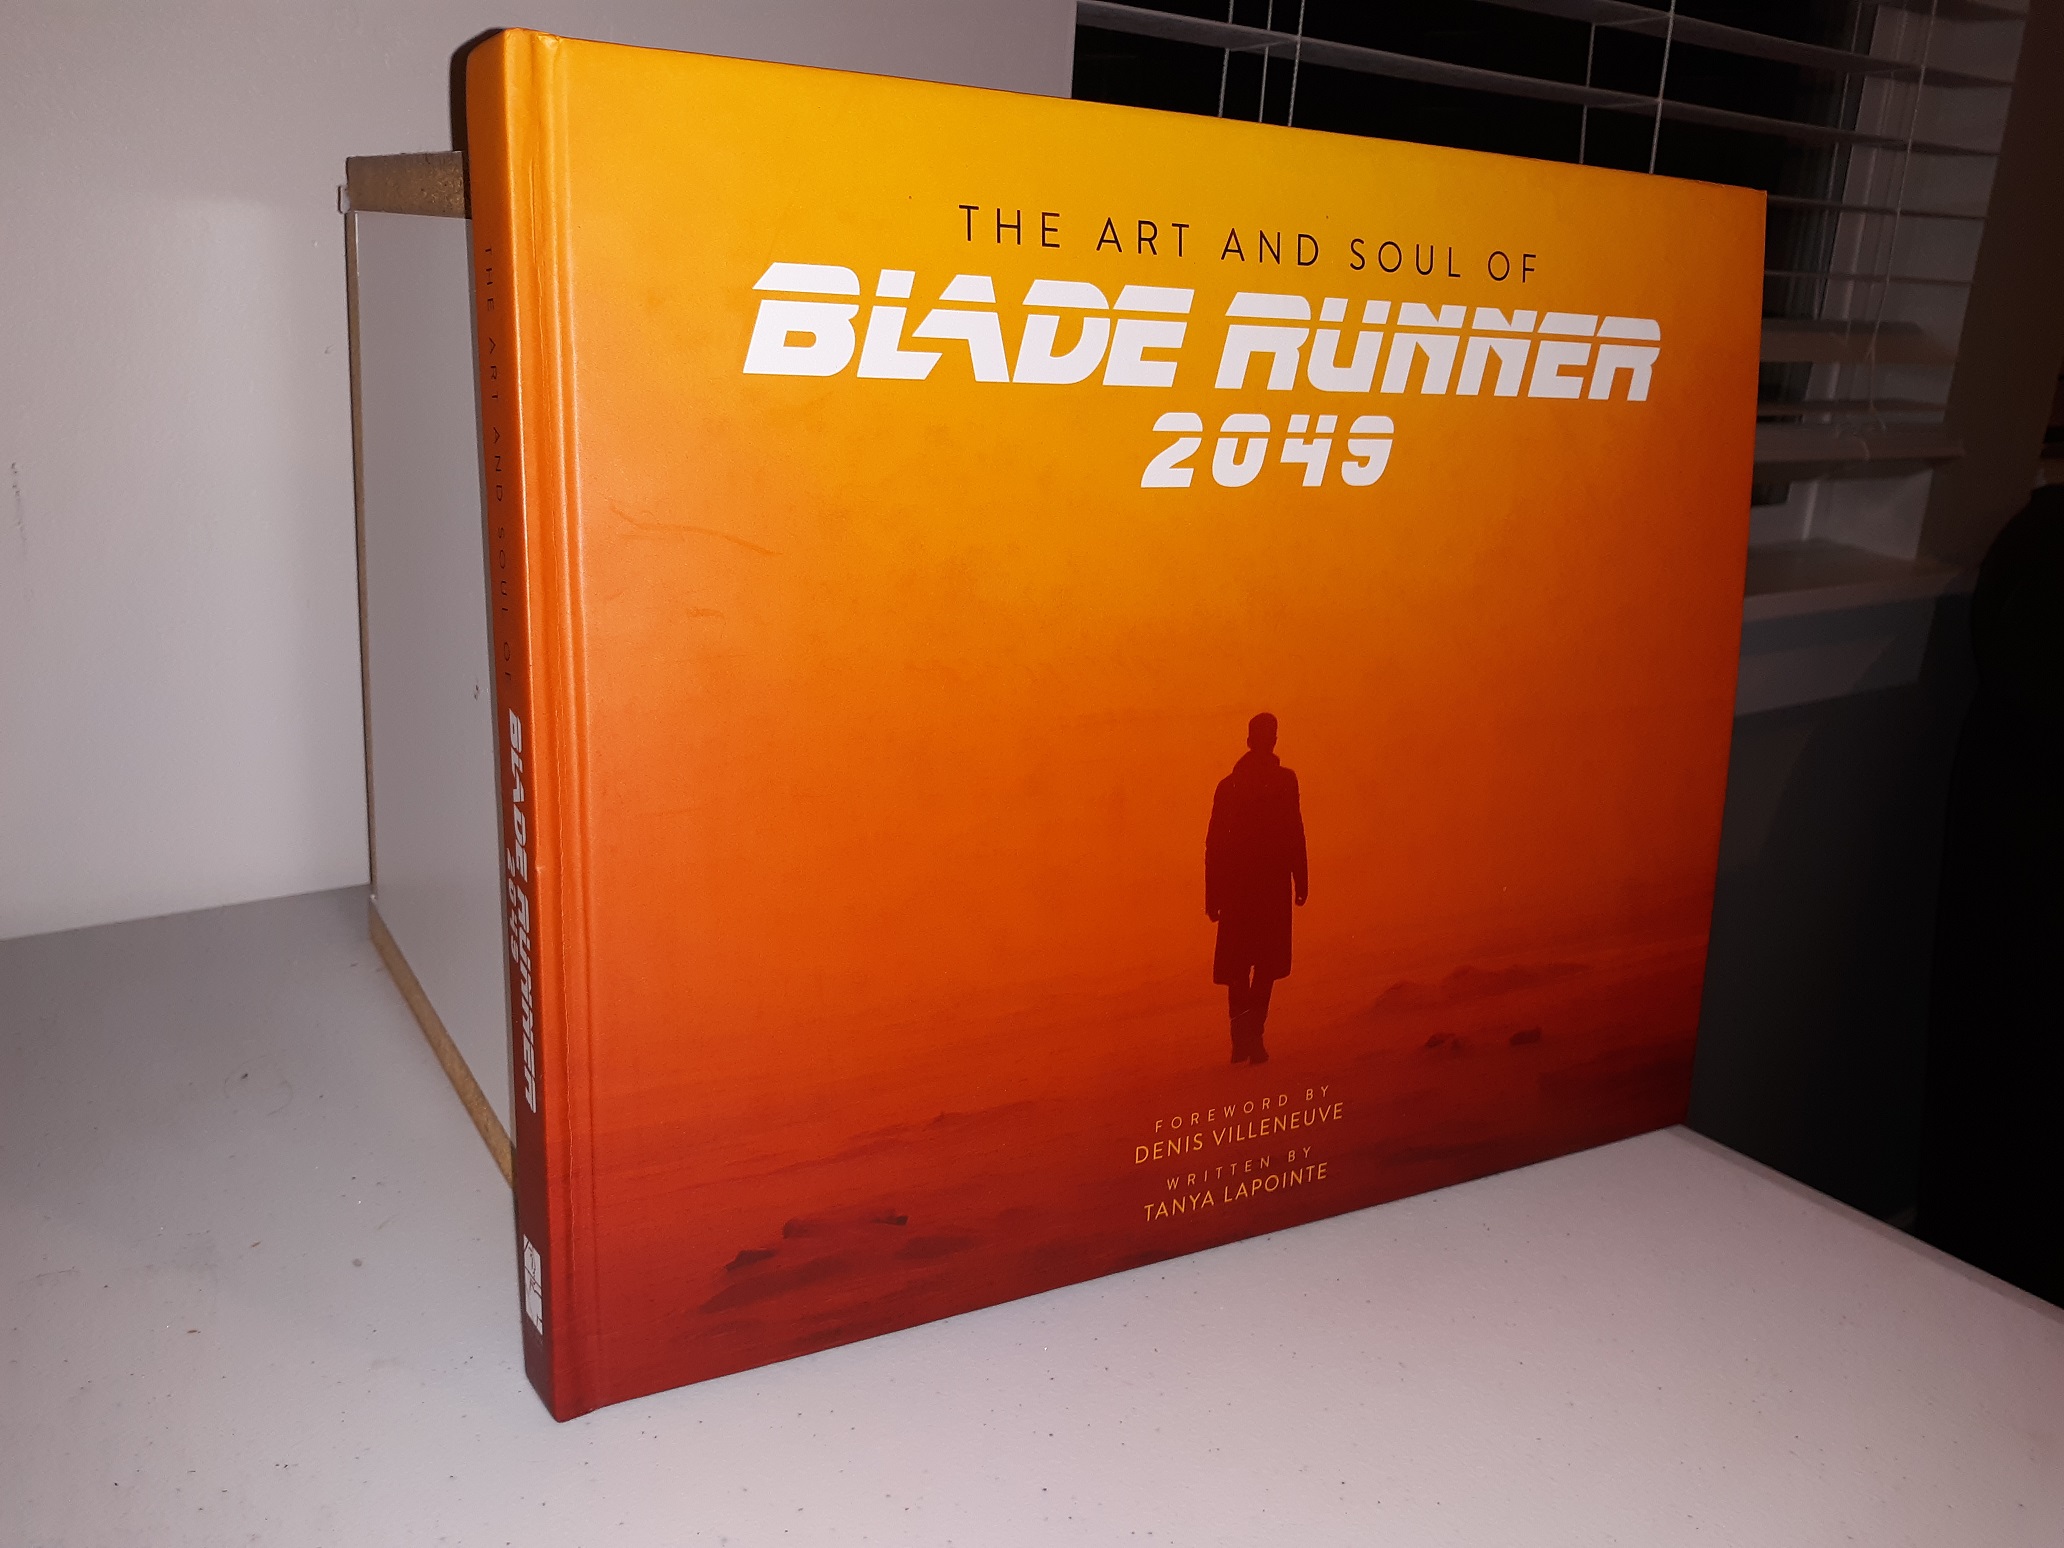 The Art and soul of Blade runner 2049